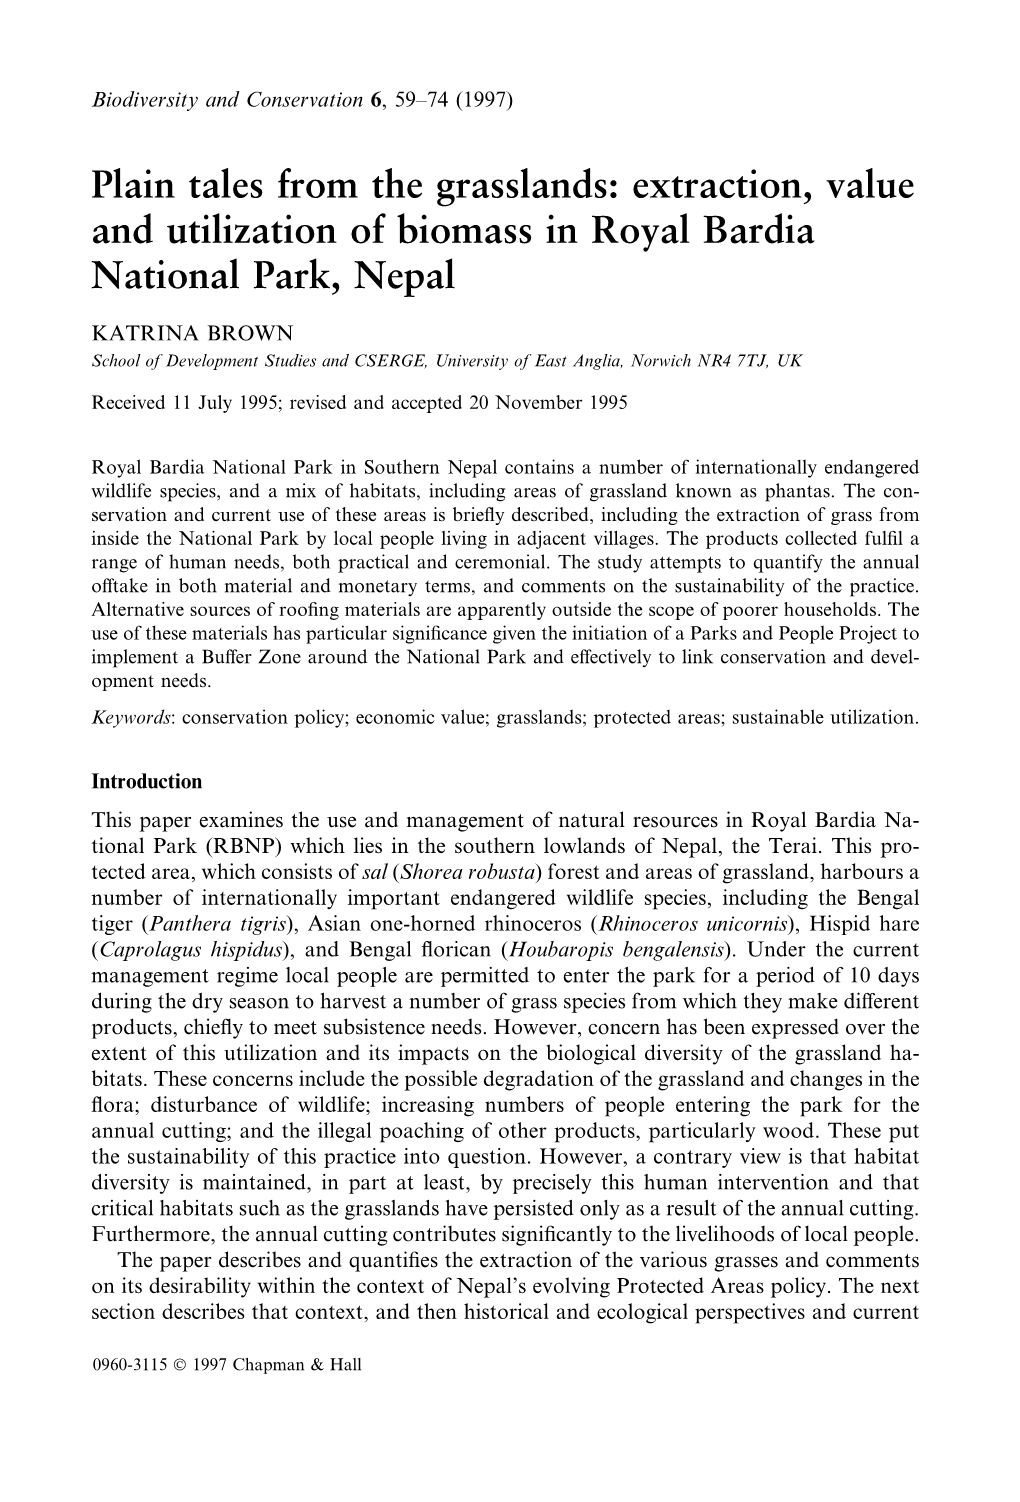 Plain Tales from the Grasslands: Extraction, Value and Utilization of Biomass in Royal Bardia National Park, Nepal